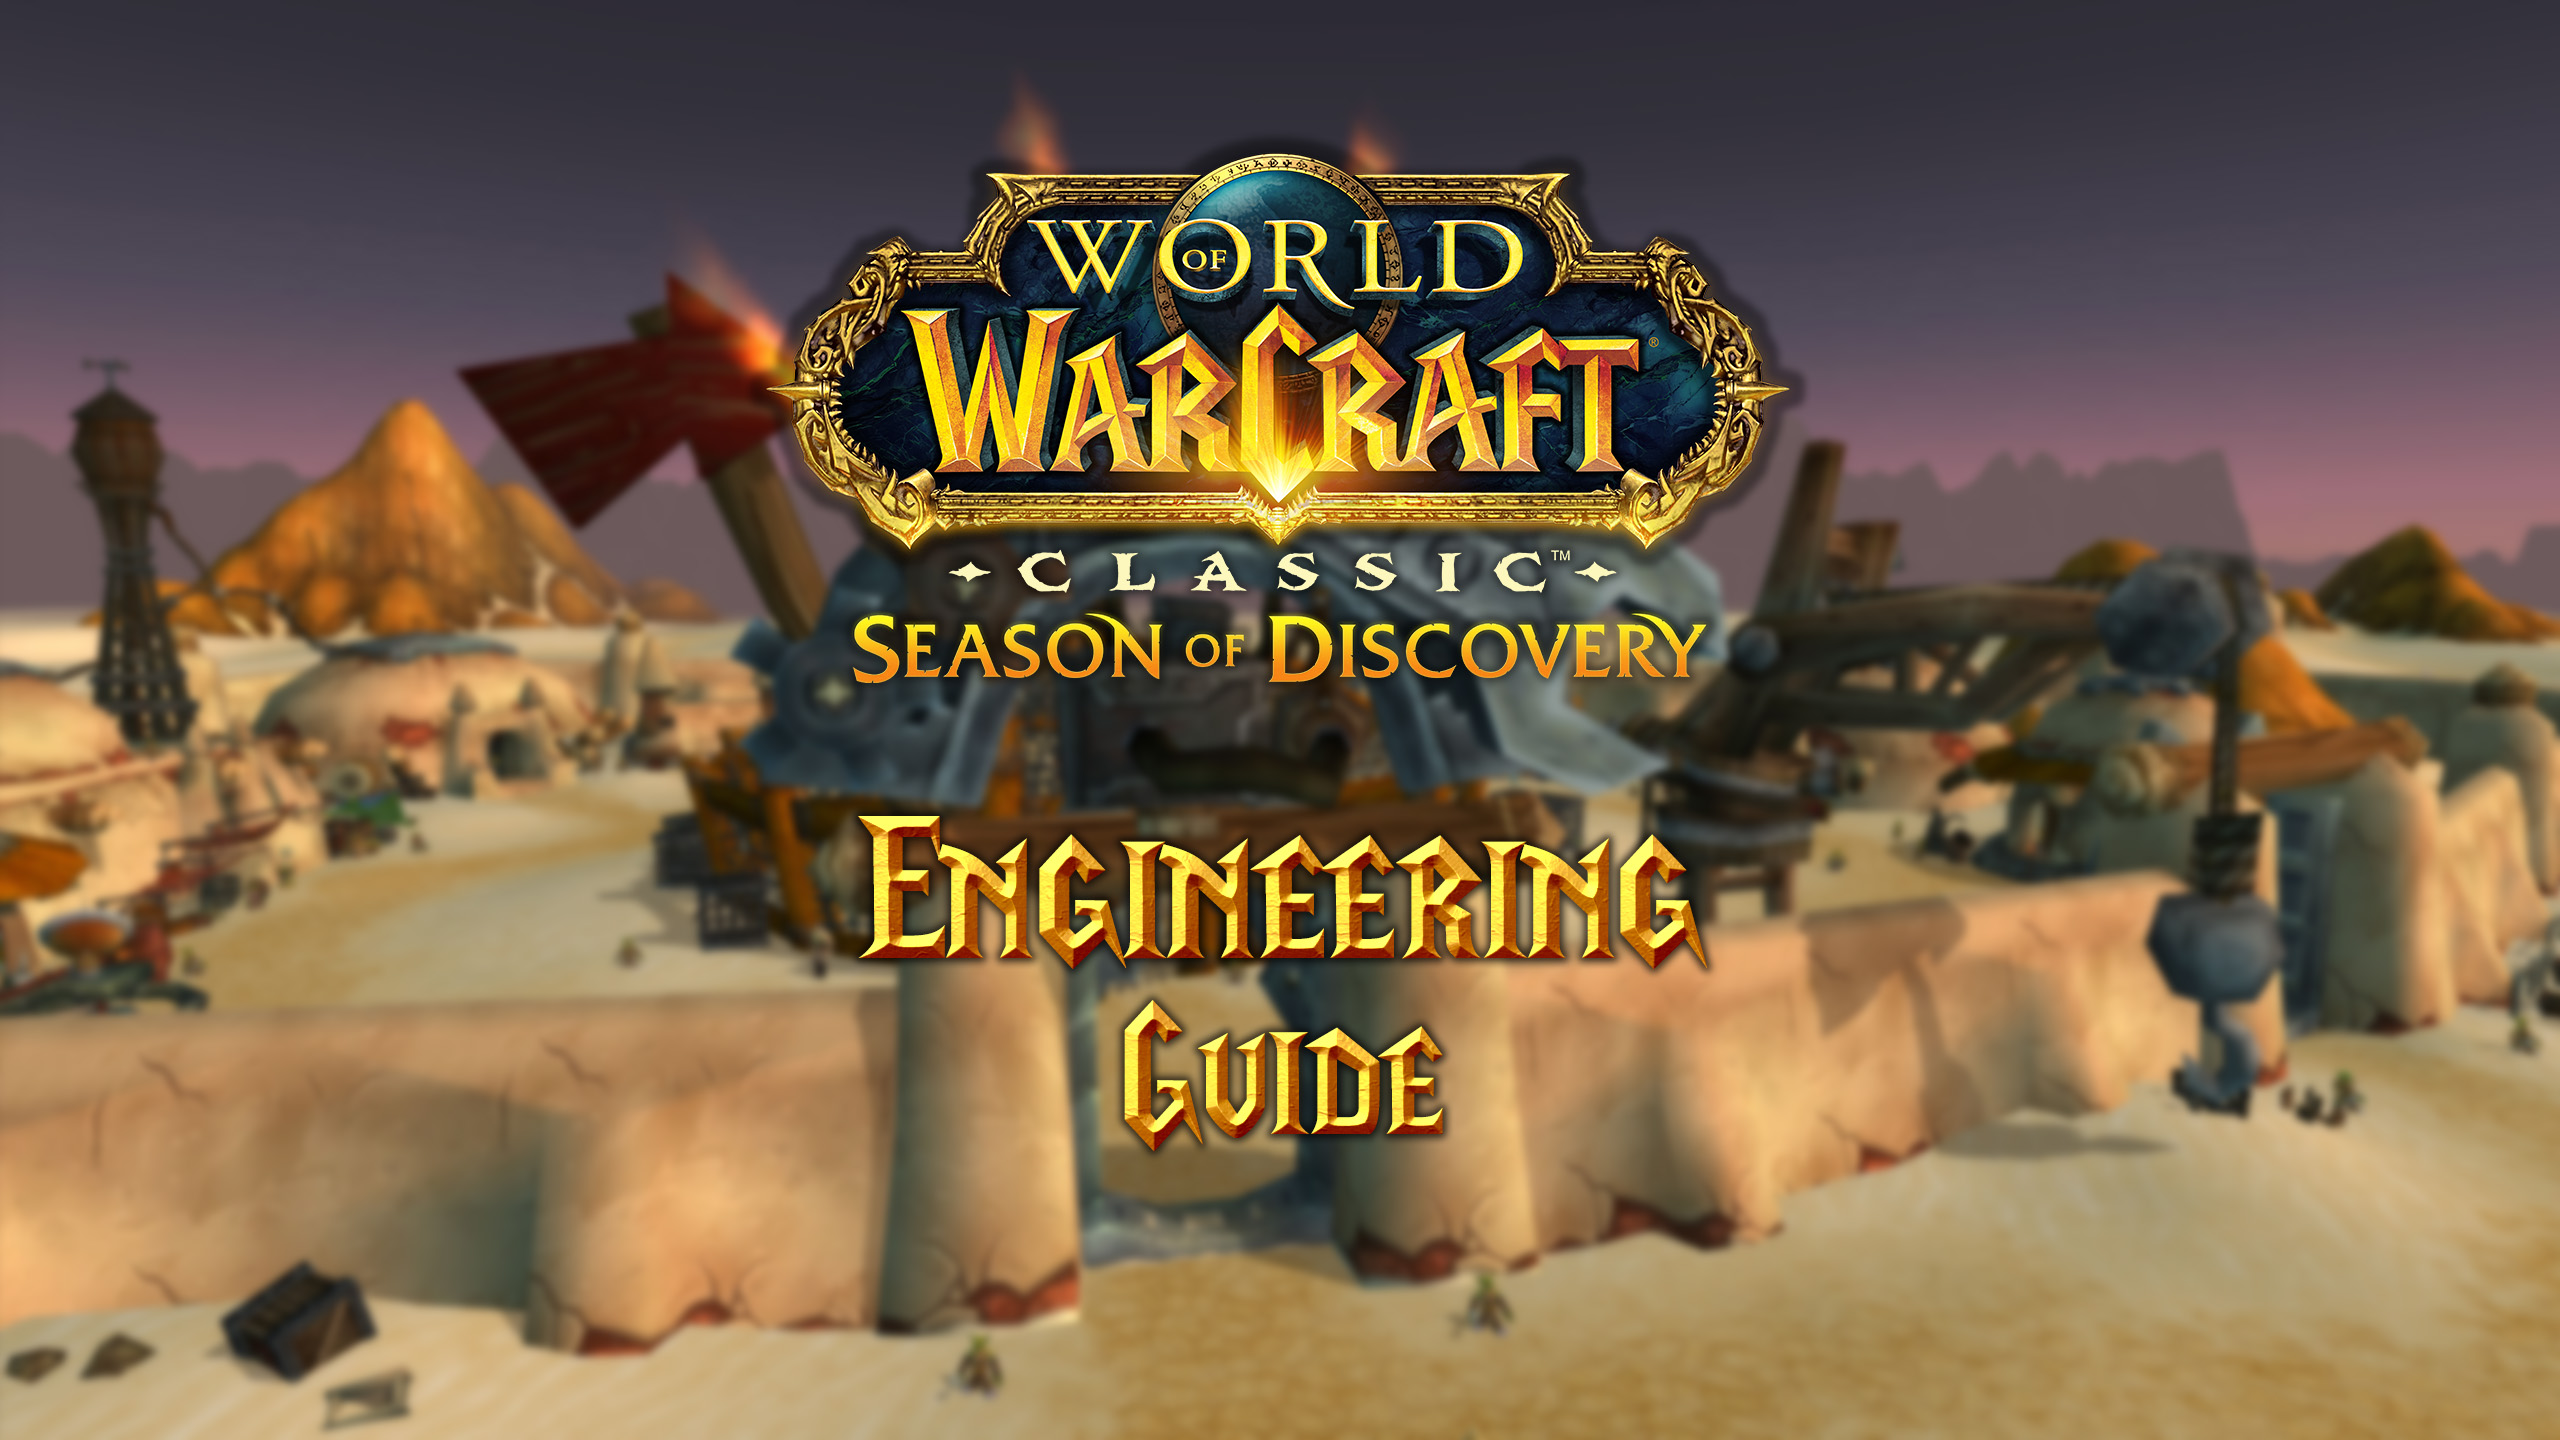 Engineering Guide for Season of Discovery (SoD)